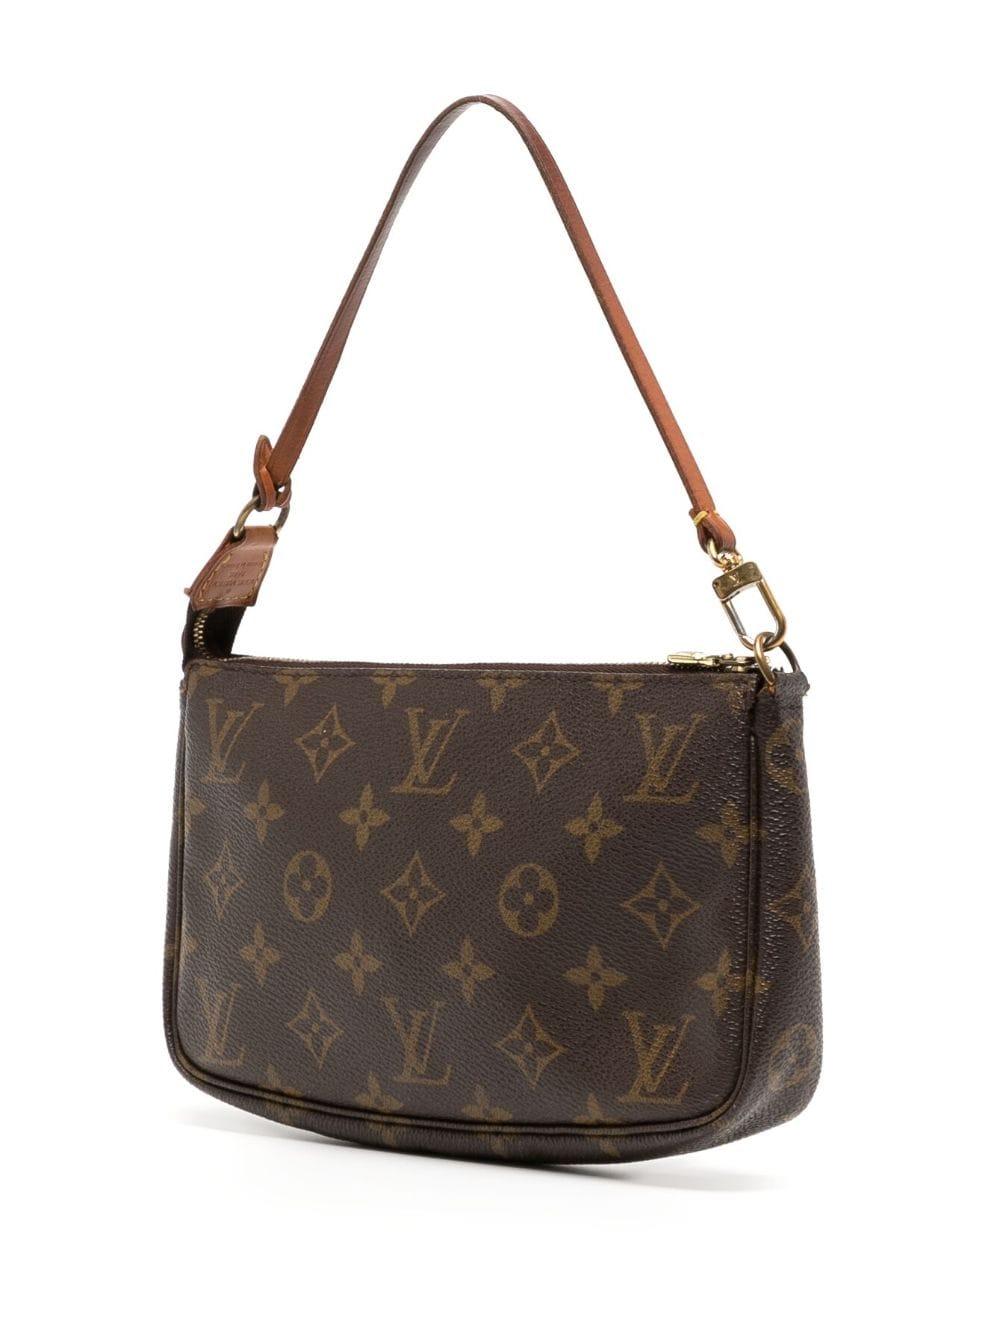 The chicest mini shoulder bag on the market: The Louis Vuitton Pochette Bag. First released in 1992, this timeless bag is made with the iconic canvas monogram print. It is a versatile accessory that can be worn from day to night, providing a stylish